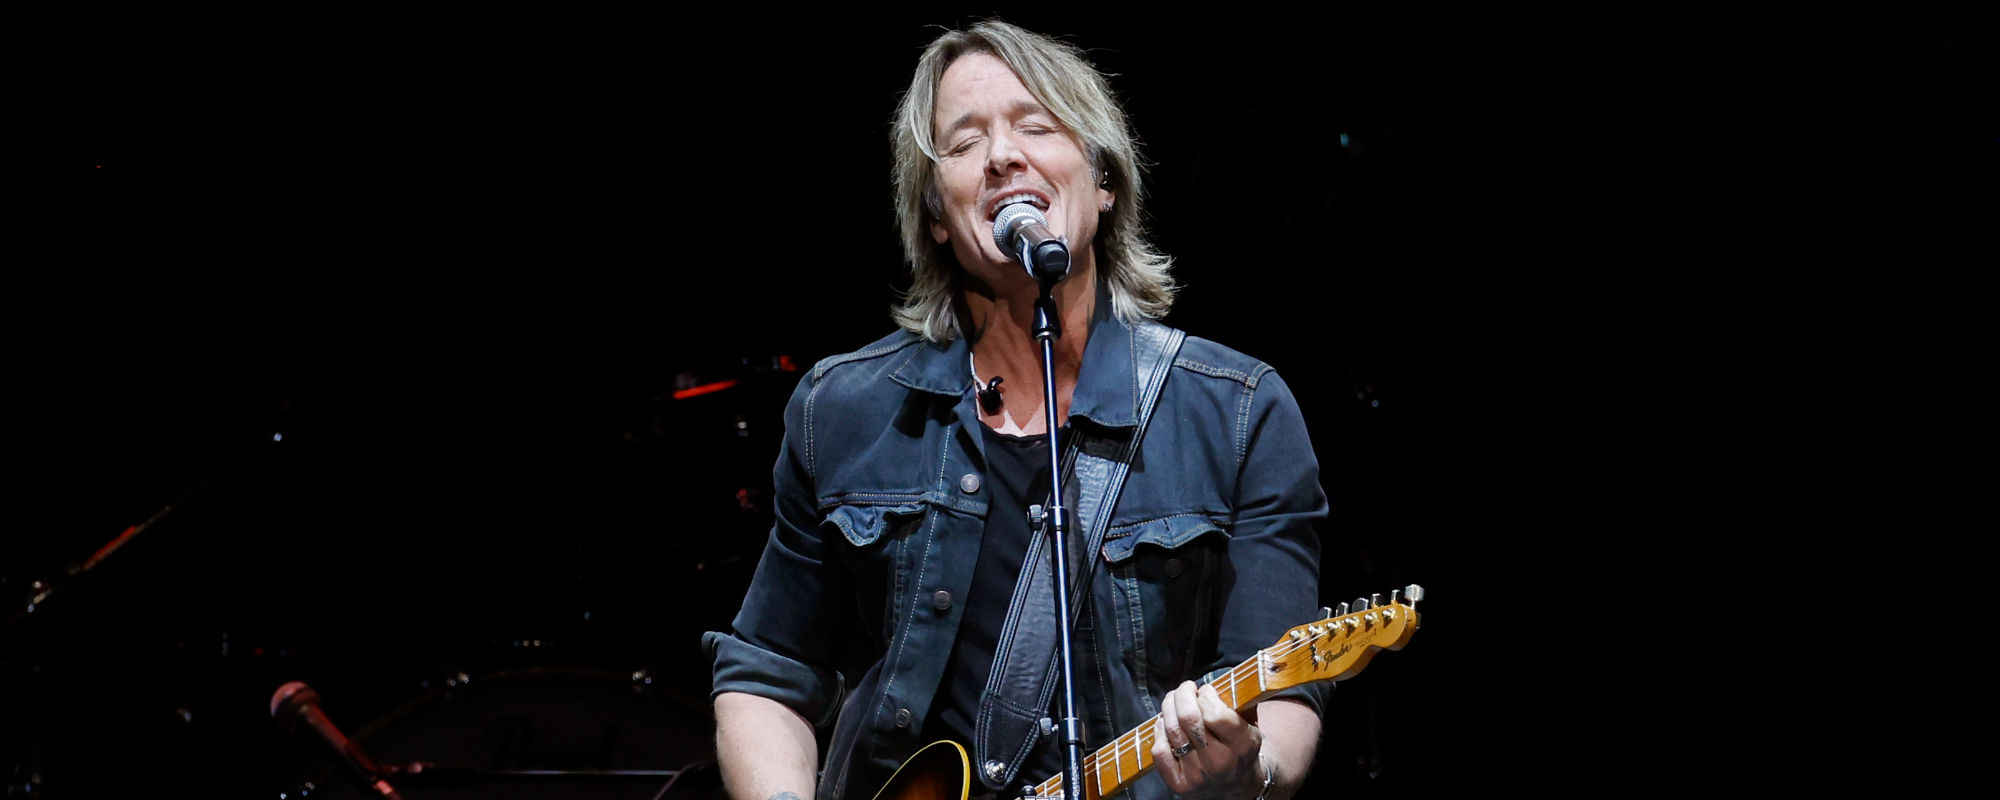 Keith Urban Brings His 2016 Hit “Blue Ain’t Your Color” to ‘The Voice’ Season 24 Finale